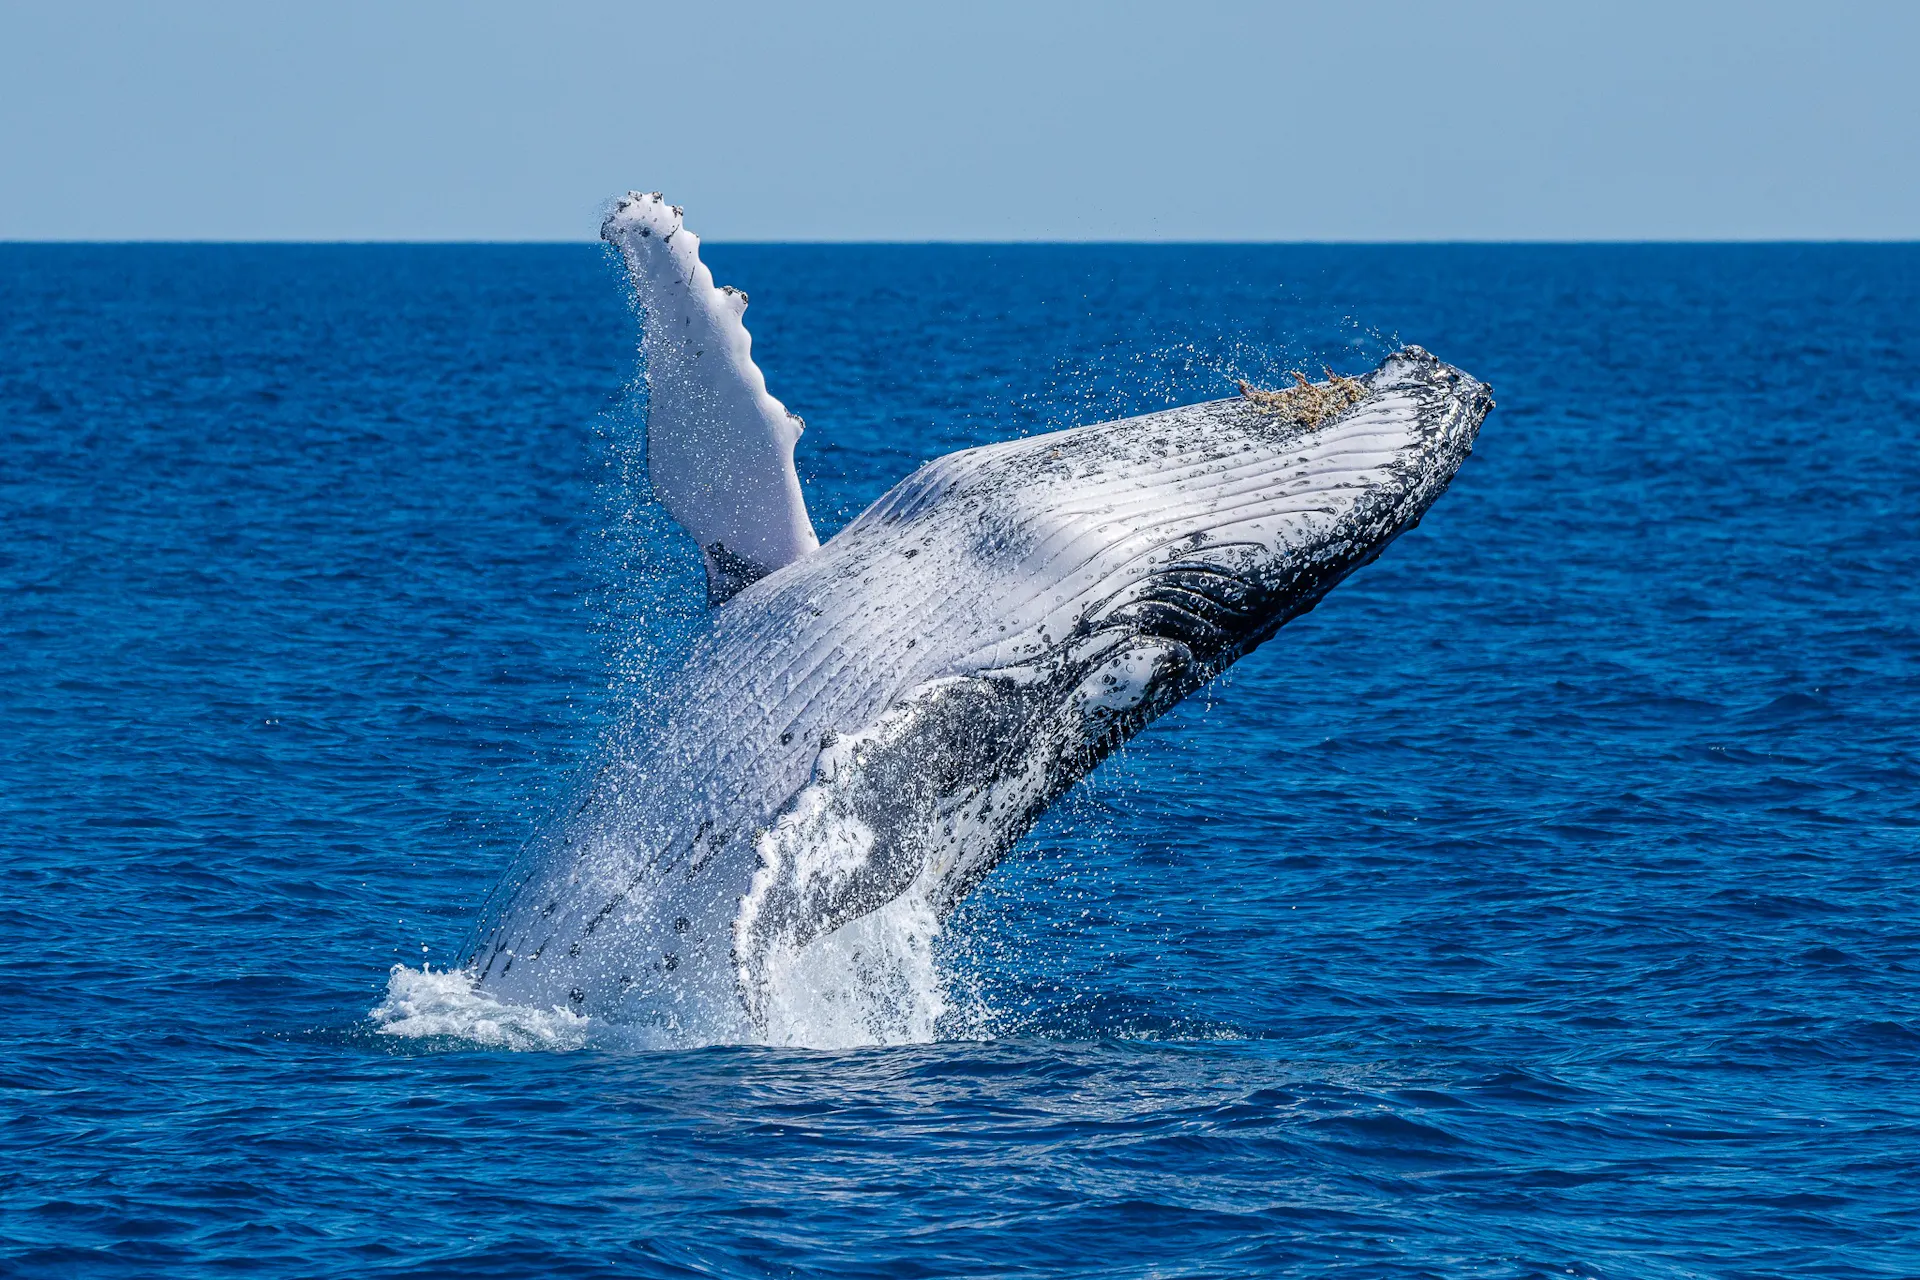 Experience the Majestic Giants of the sea with one of the most experienced whale watch skippers